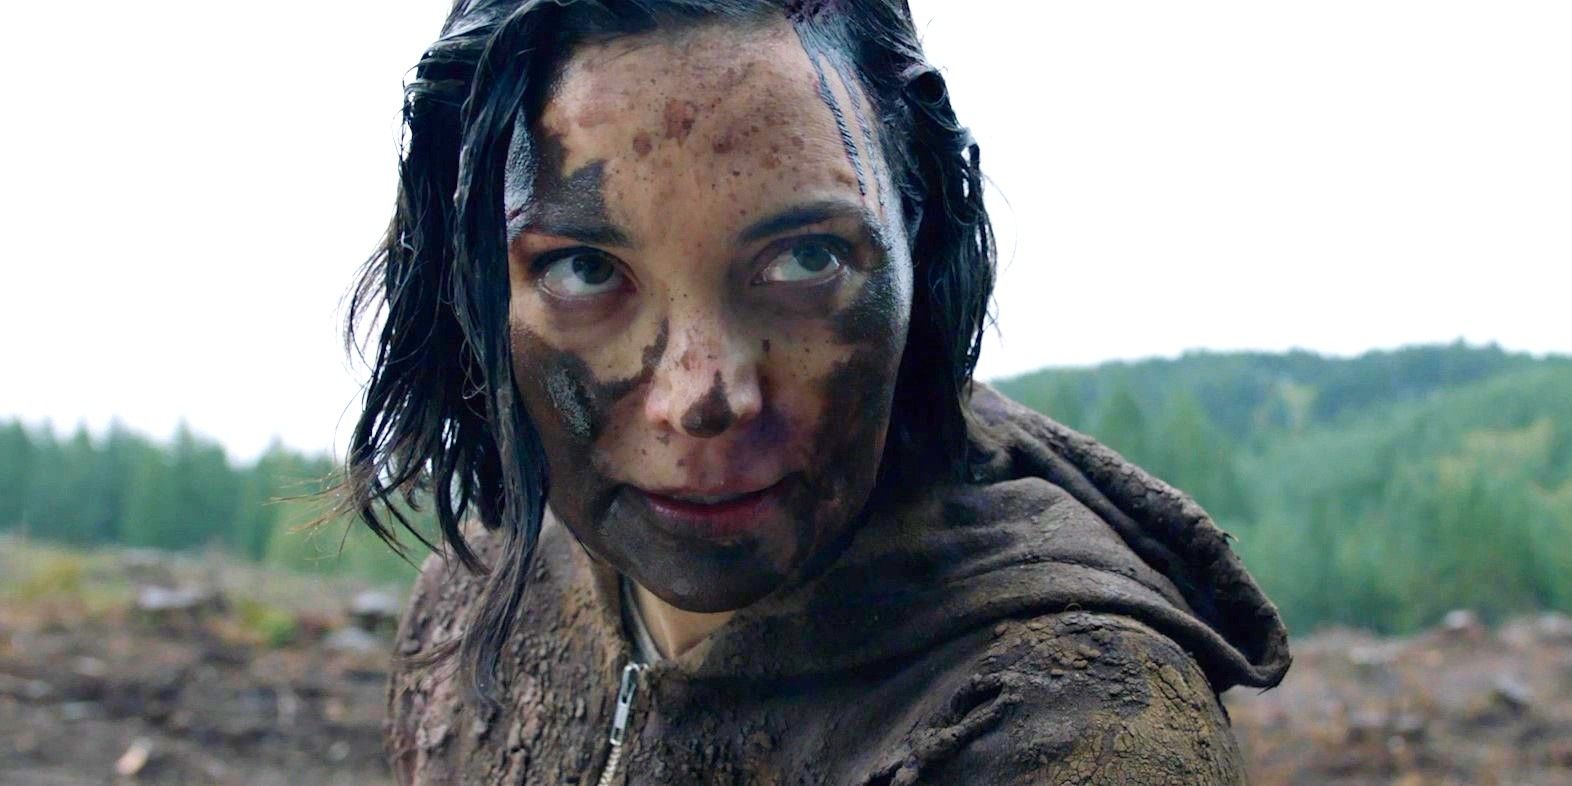 An image of Jessica (Jules Willcox)'s face covered in mud and blood in Alone (2020).